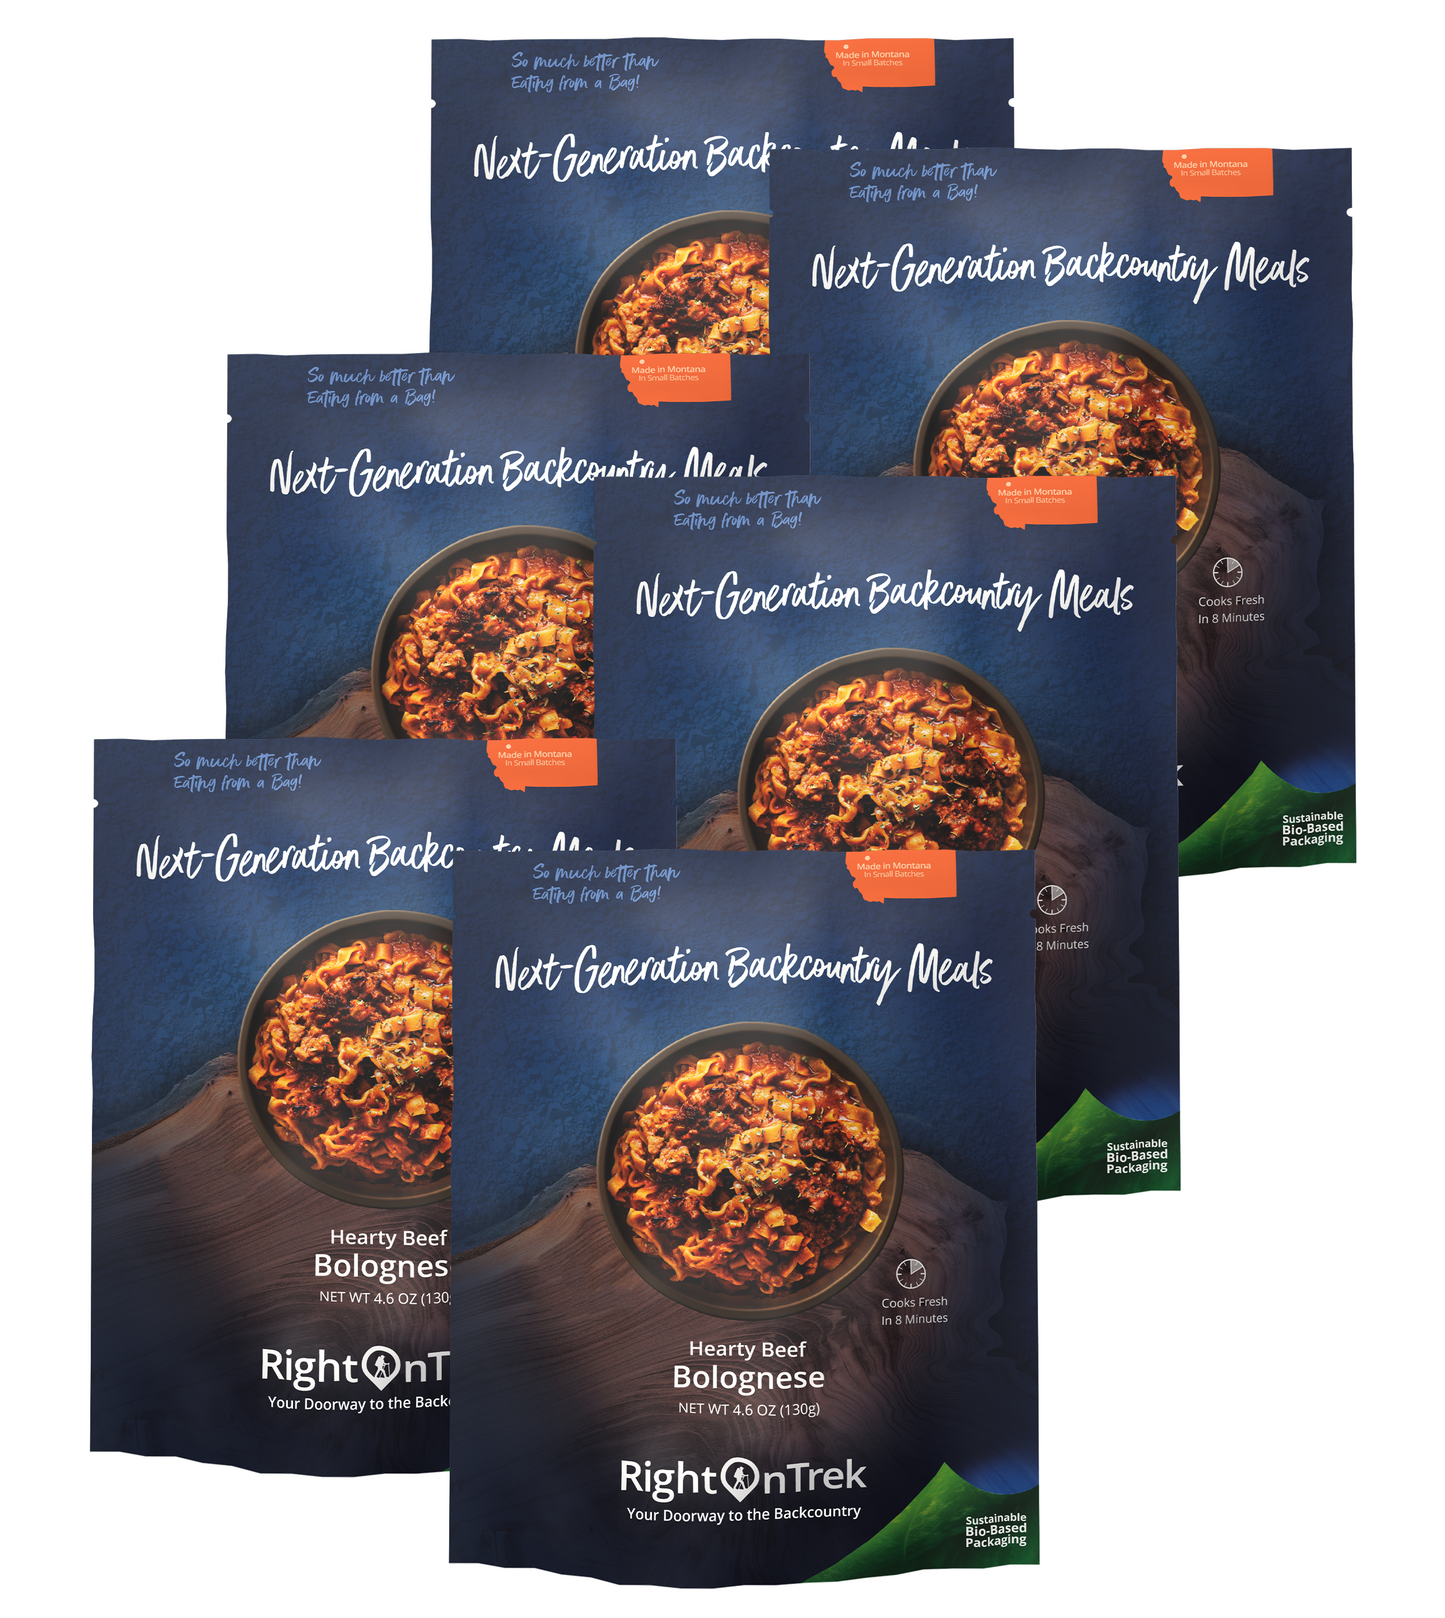 RightonTrek hearty beef bolognese backcountry meal bundle